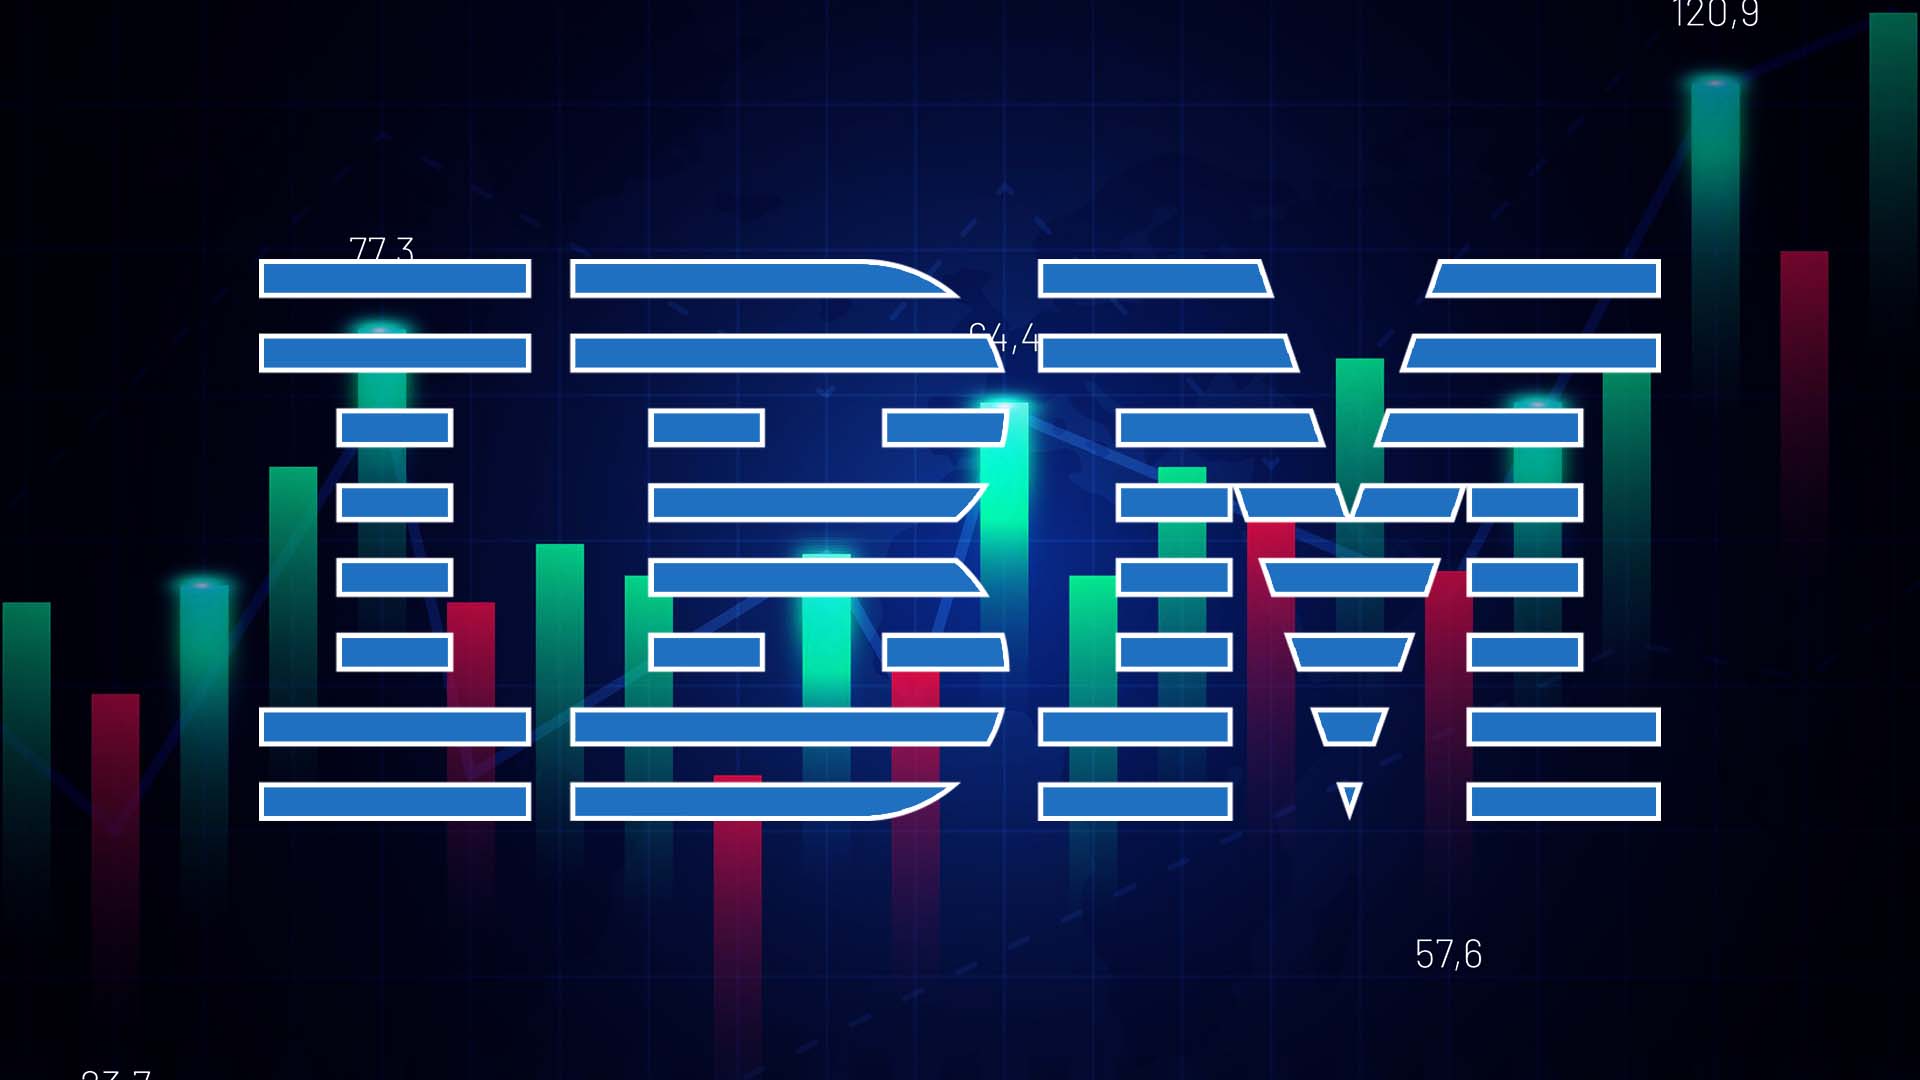 IBM Stock Uplifting Gains, Is the ideal time to create long positions?